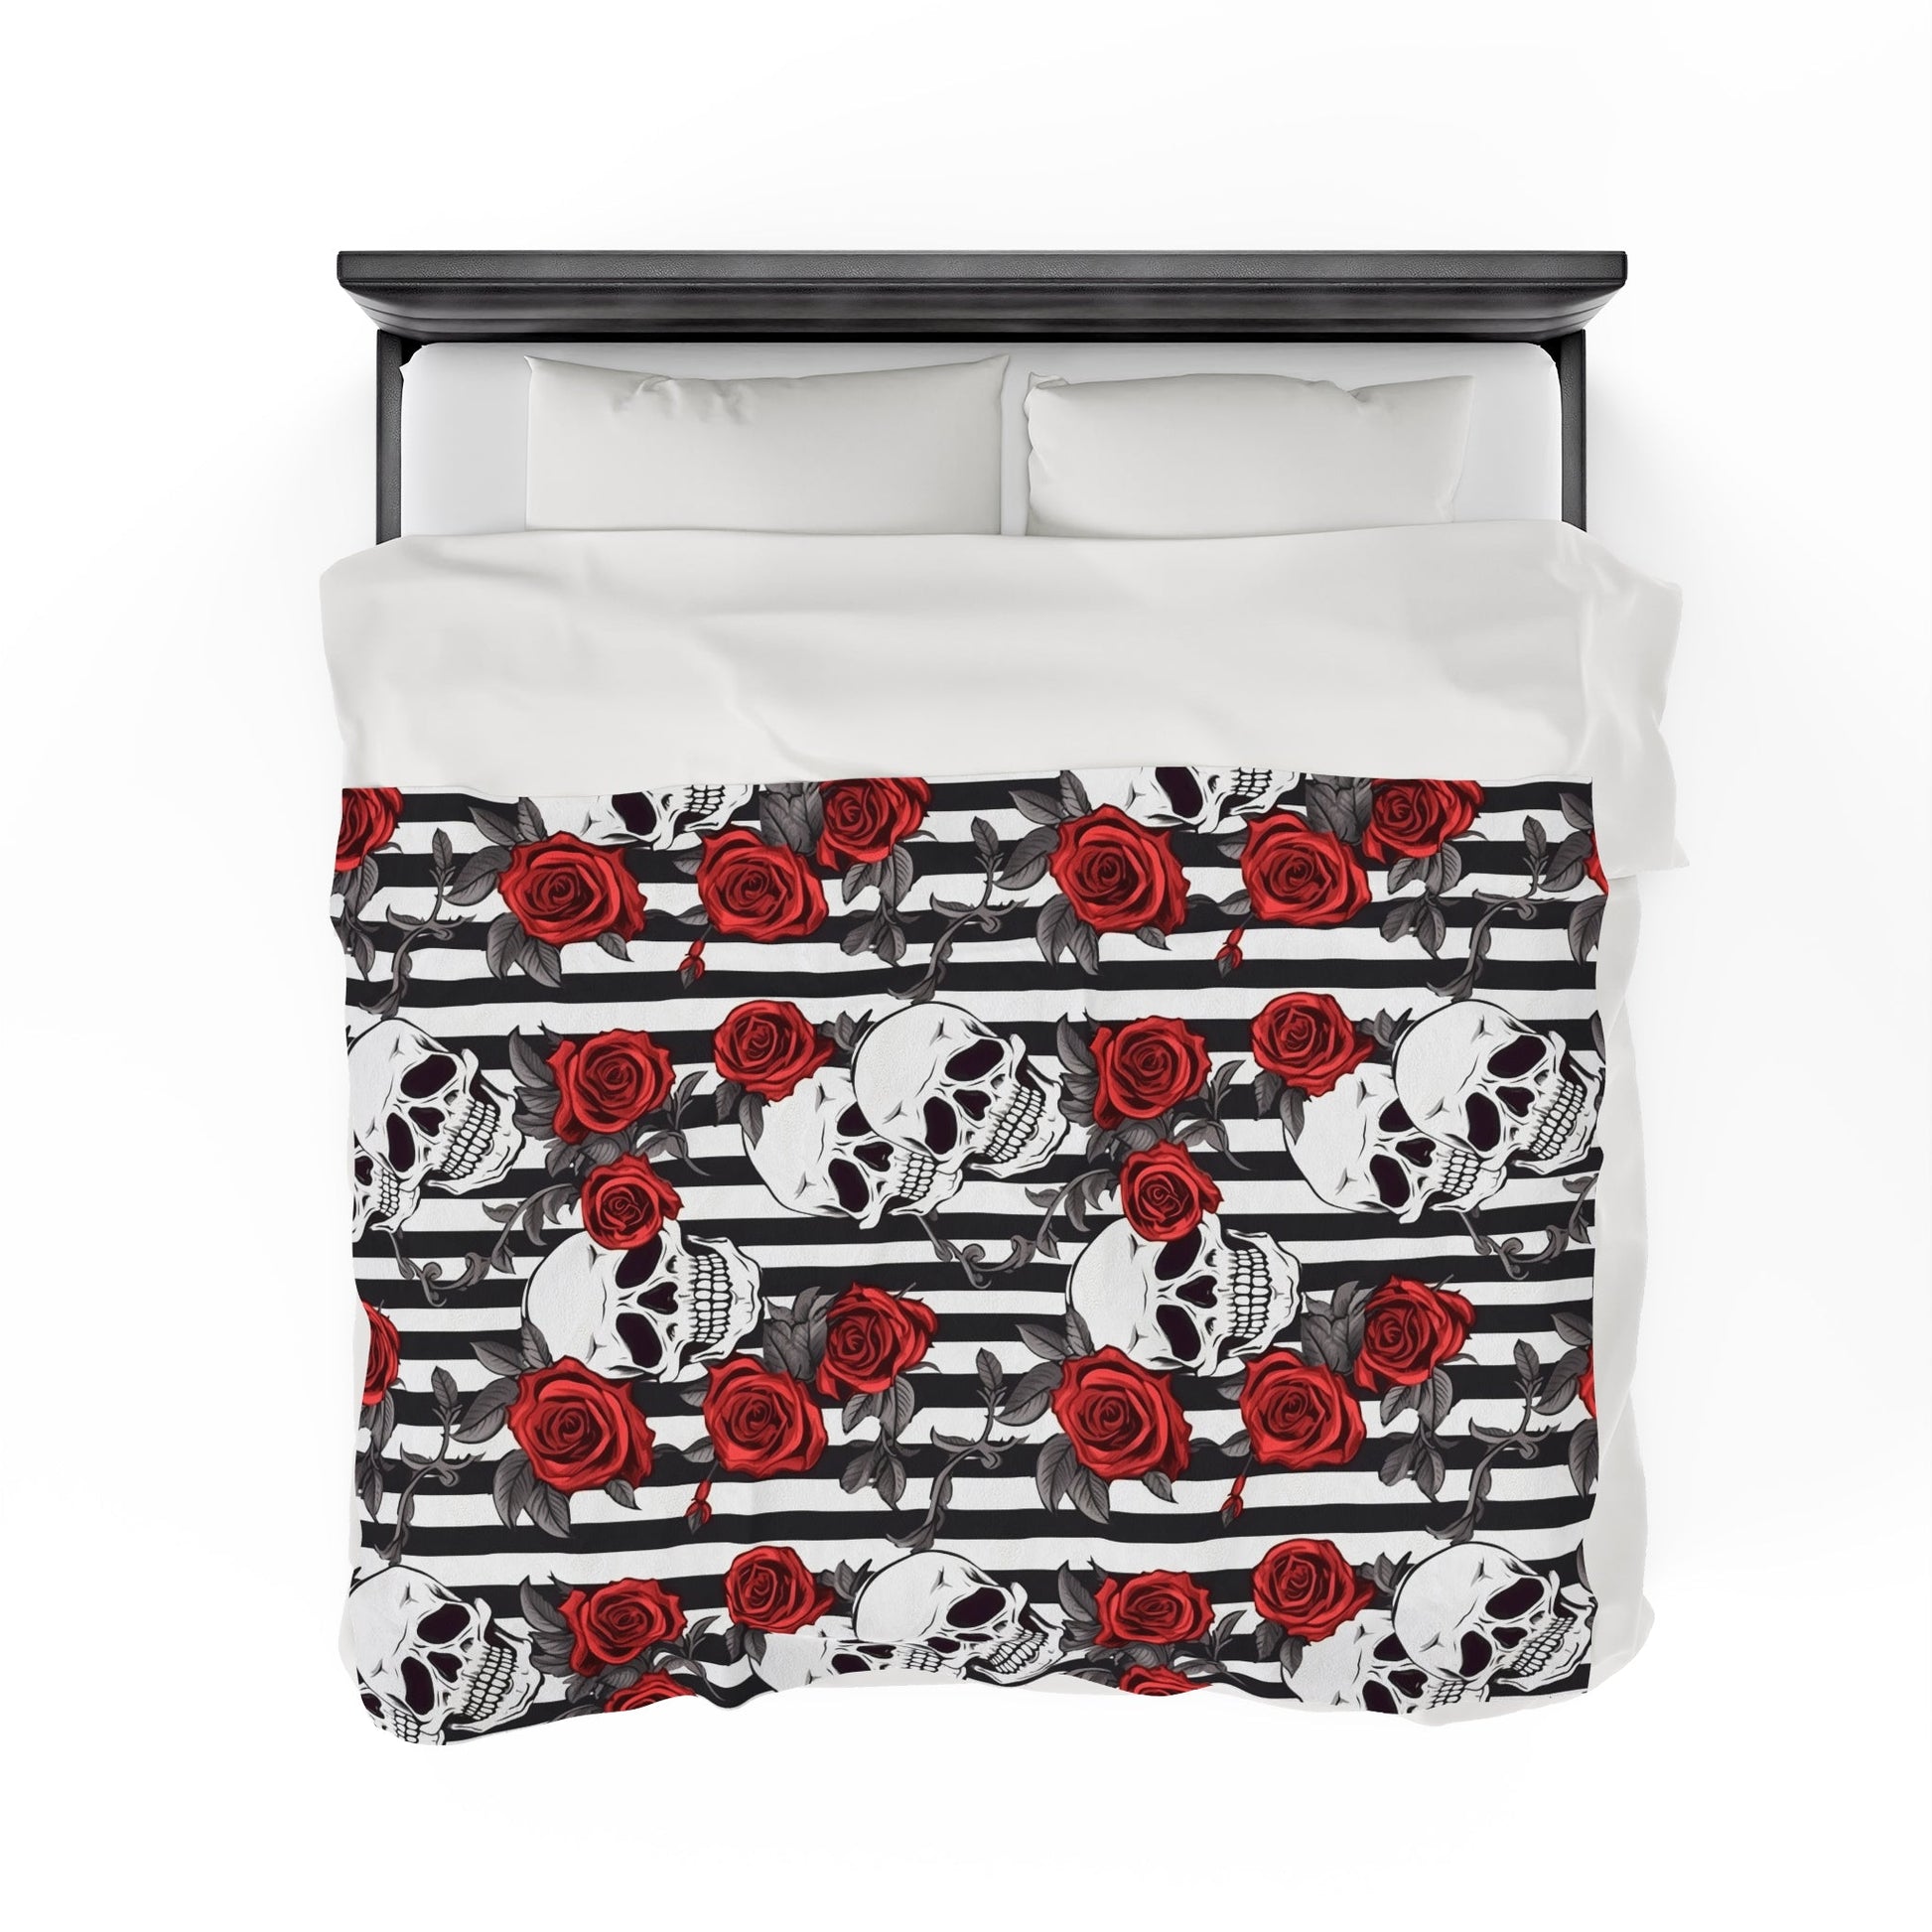 Skulls Red Roses and Stripes Throw BlanketAll Over PrintsVTZdesigns30" × 40"All Over PrintAOPBed